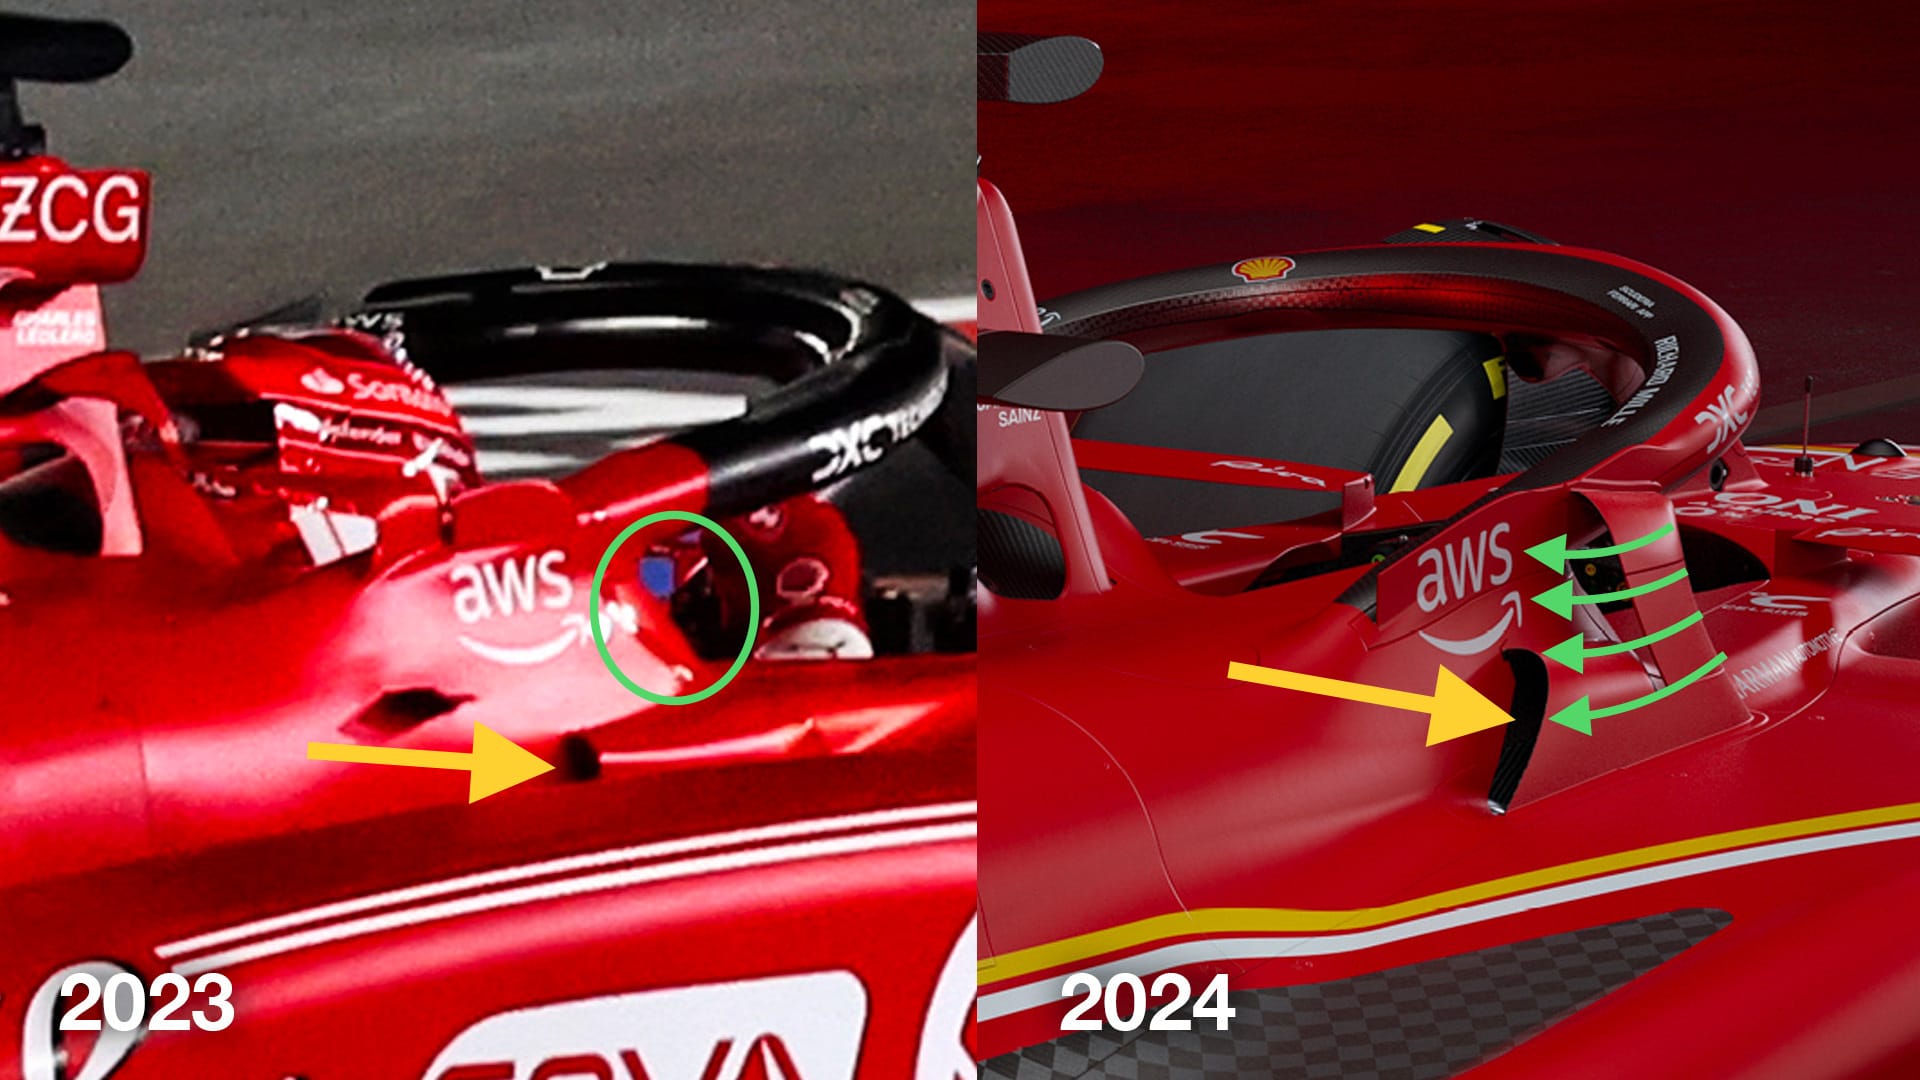 Ferrari tackled Achilles' heel of last year on completely redesigned  2023 car · RaceFans